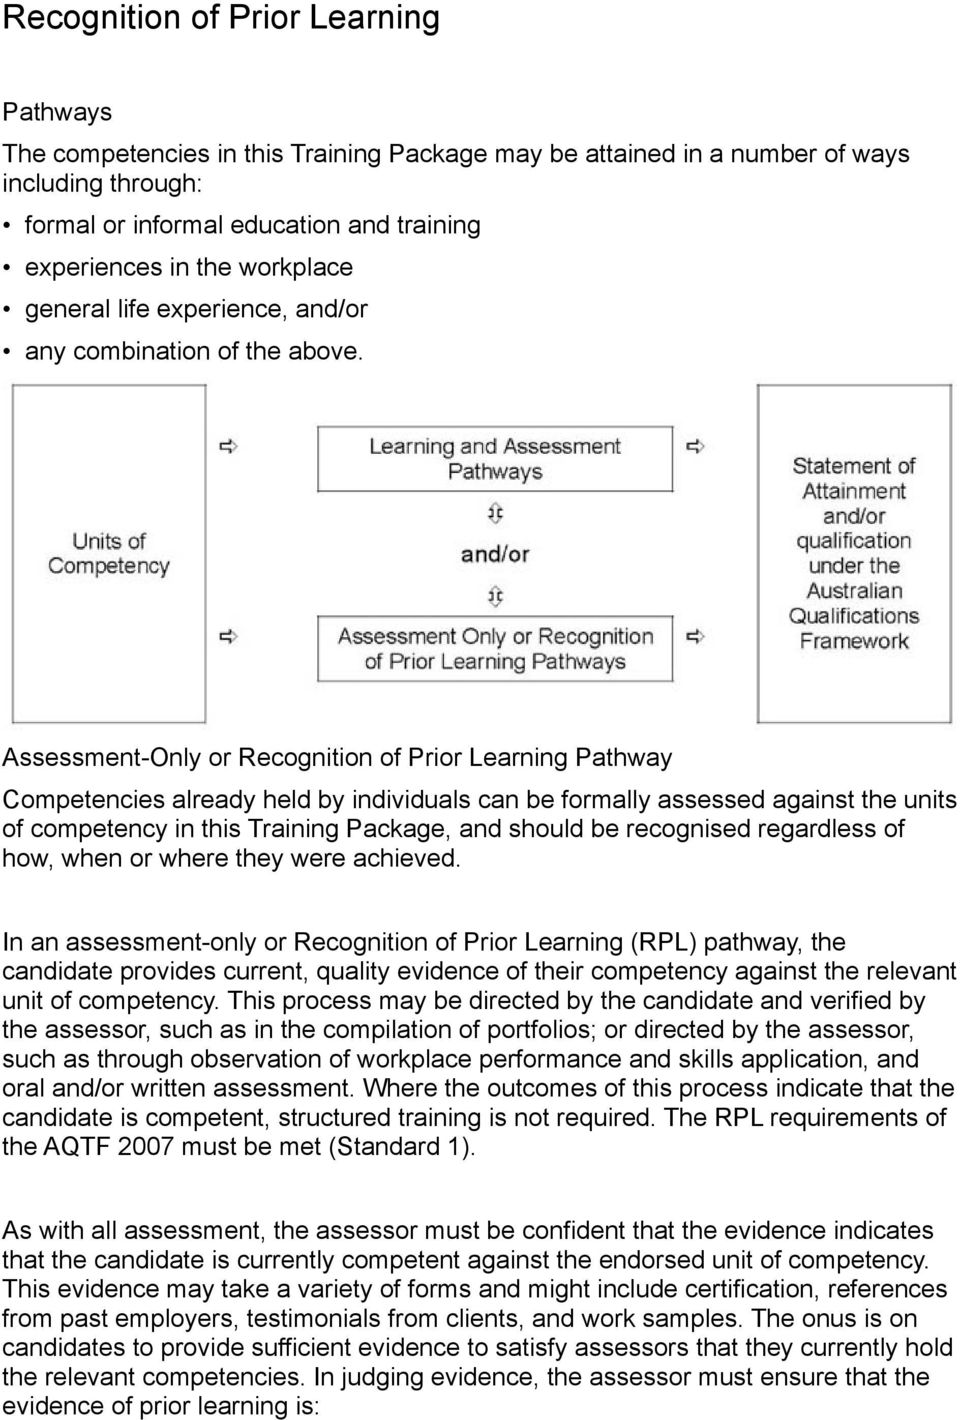 Assessment-Only or Recognition of Prior Learning Pathway Competencies already held by individuals can be formally assessed against the units of competency in this Training Package, and should be